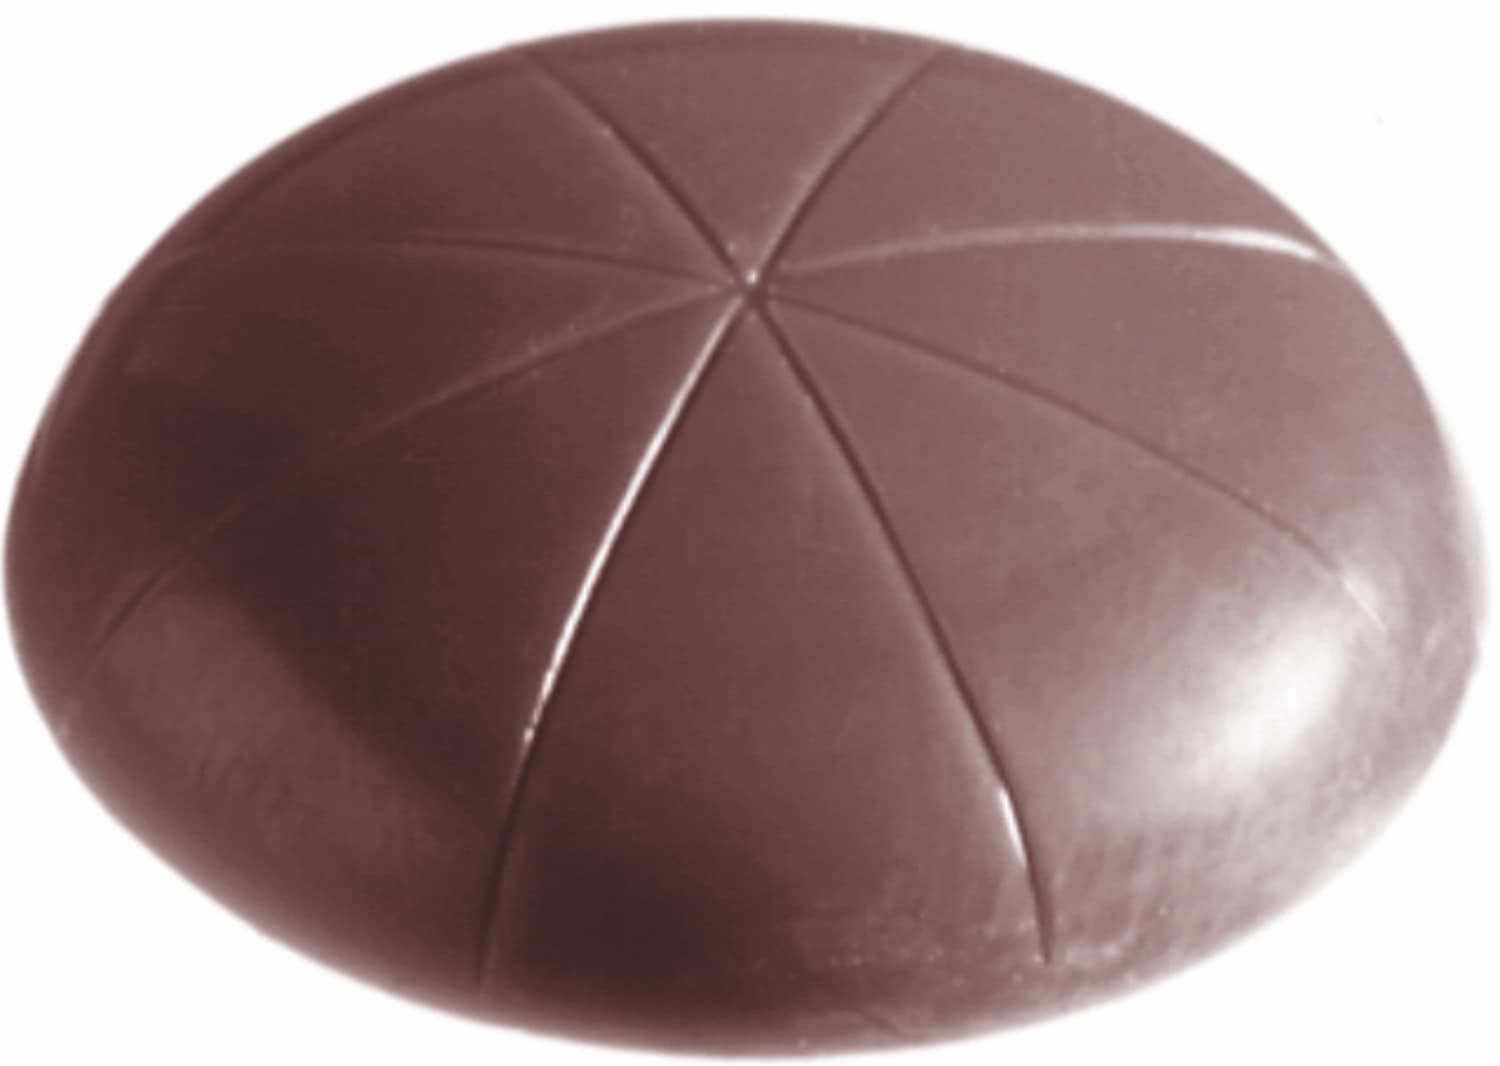 Chocolate mould "Biscuit" 421321